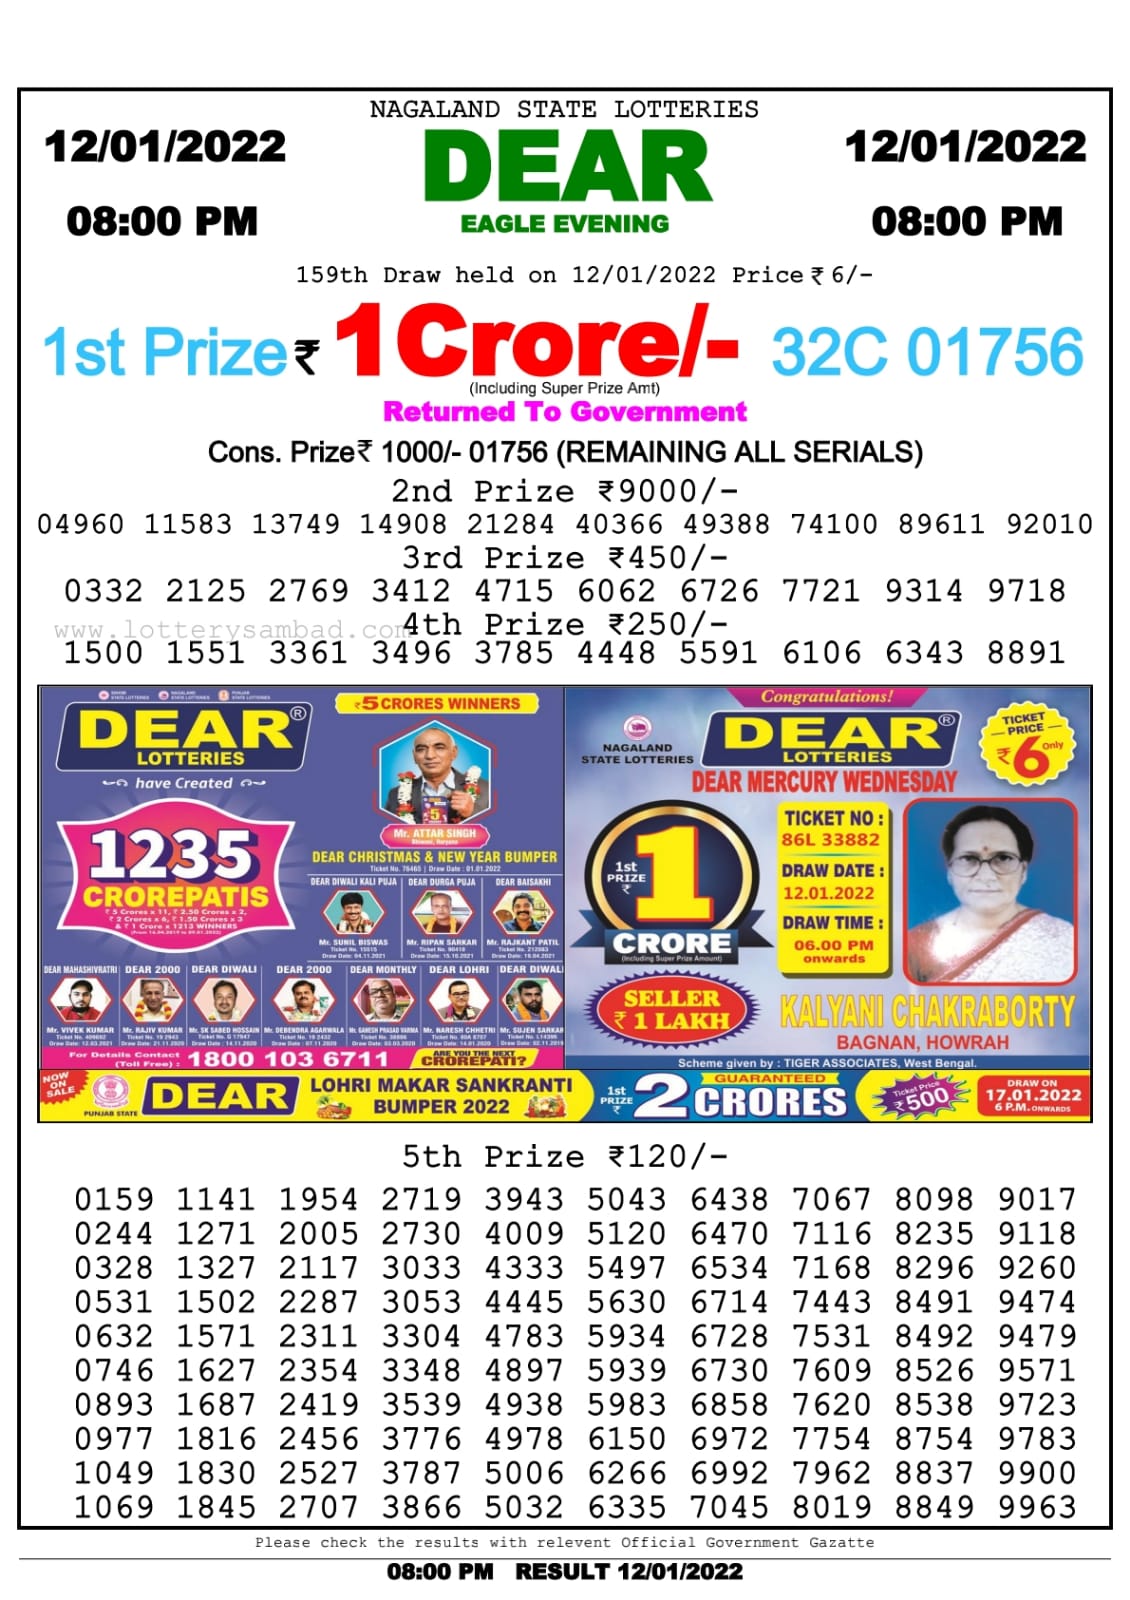 Dear Lottery Nagaland state Lottery Results 6.00 PM 12/01/2022